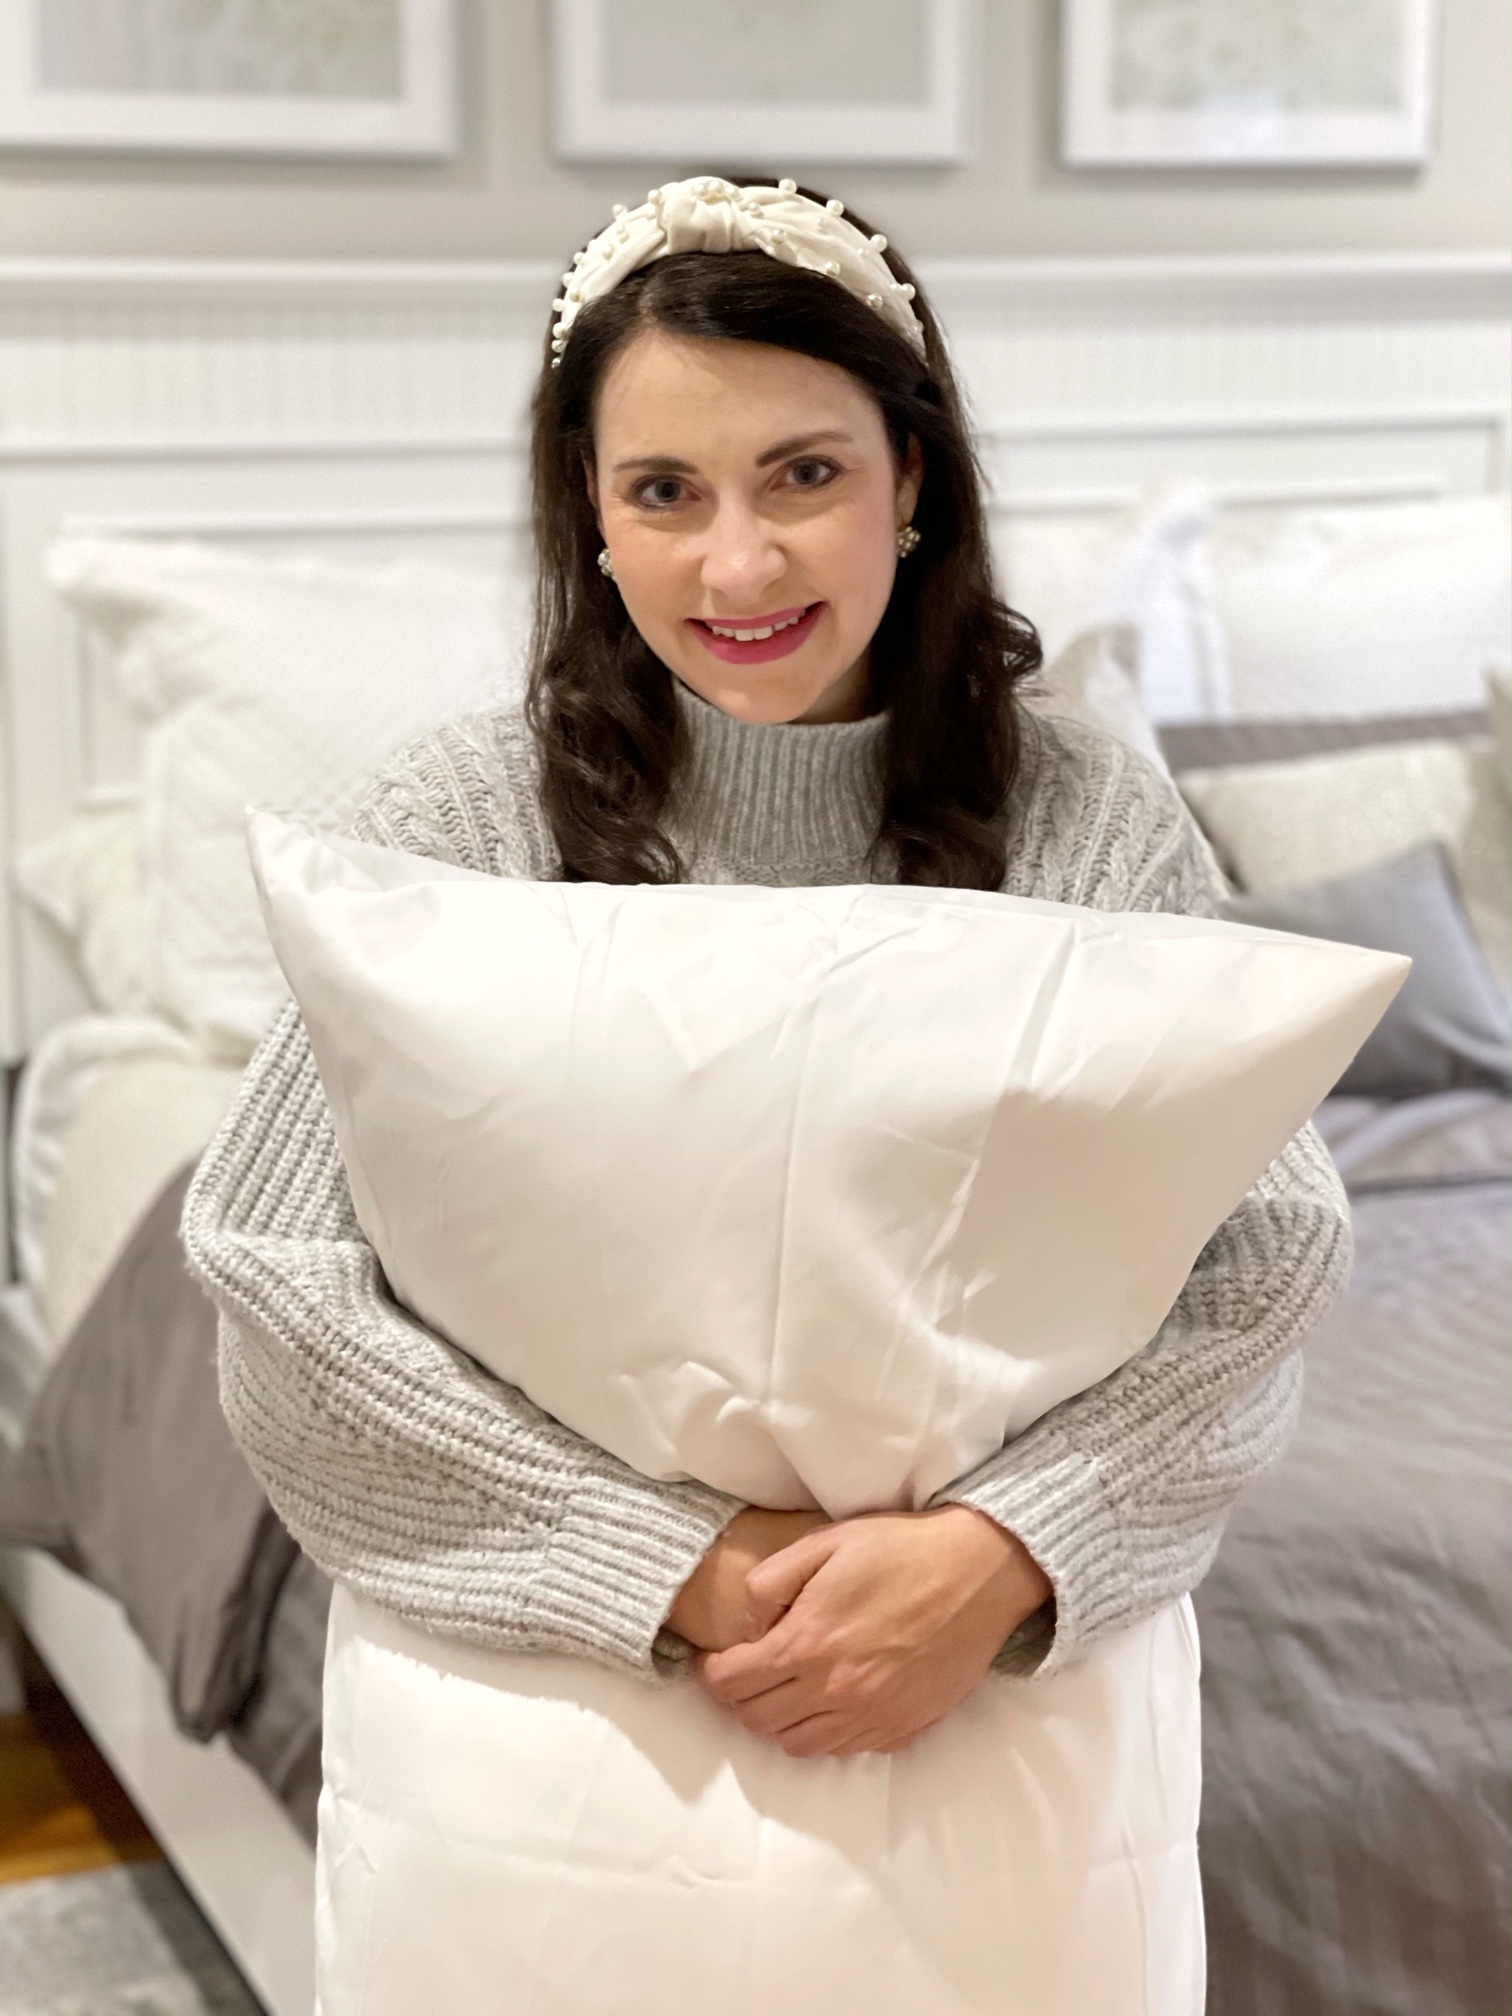 miracle bed sheets, the-alyst.com